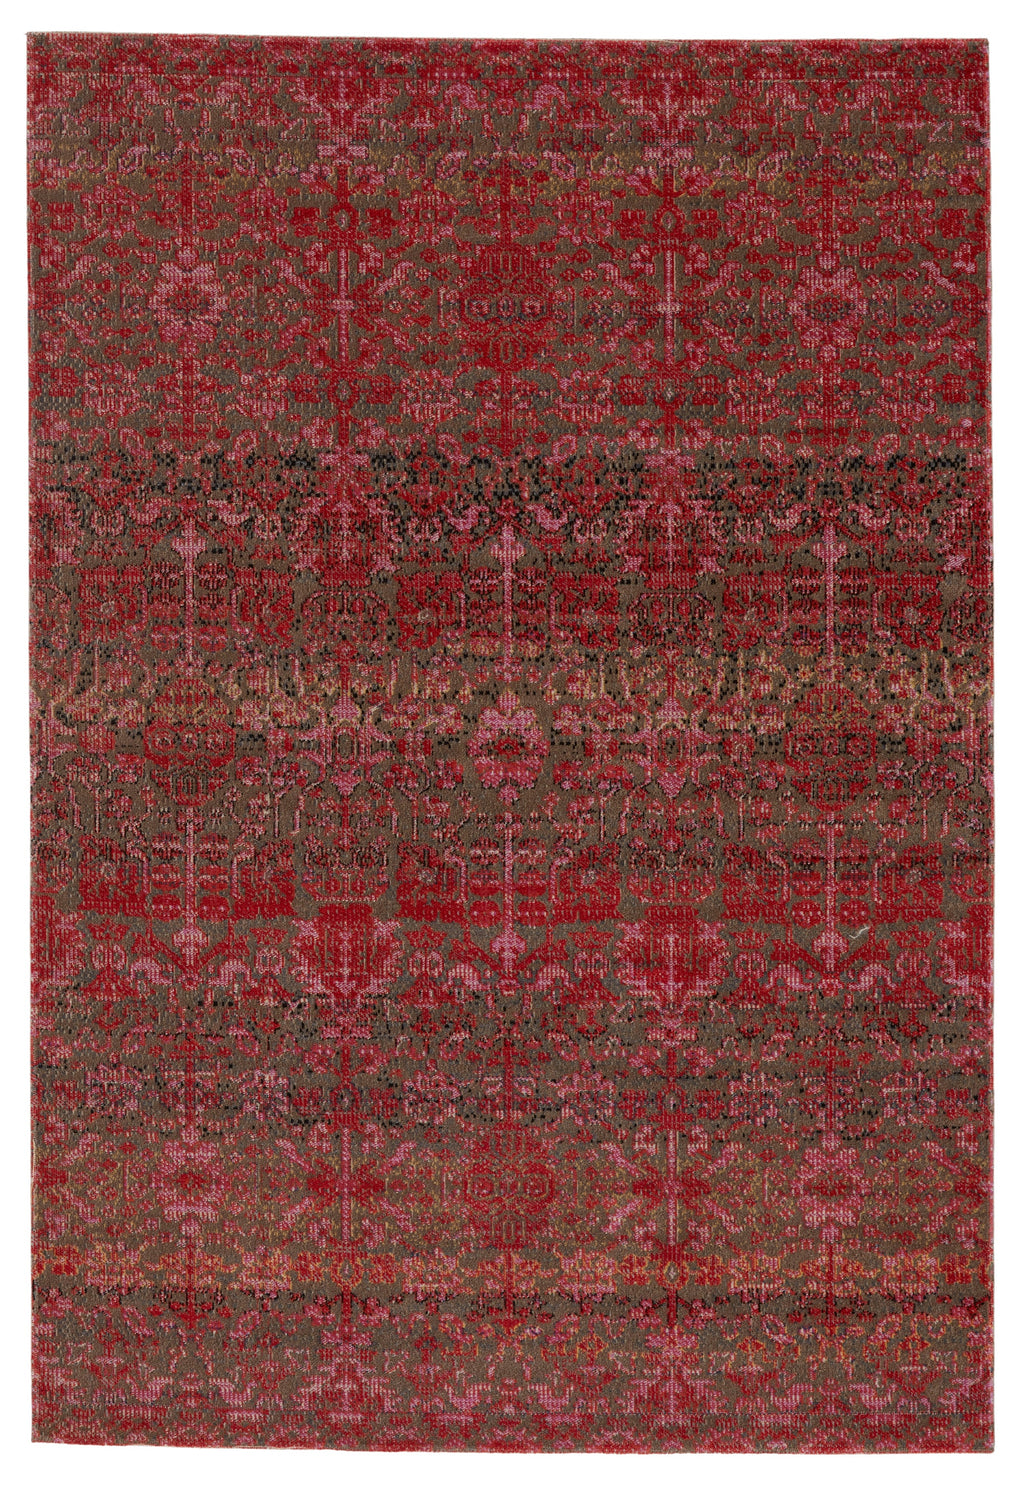 Bodega Indoor/Outdoor Trellis Rug in Red & Taupe by Jaipur Living